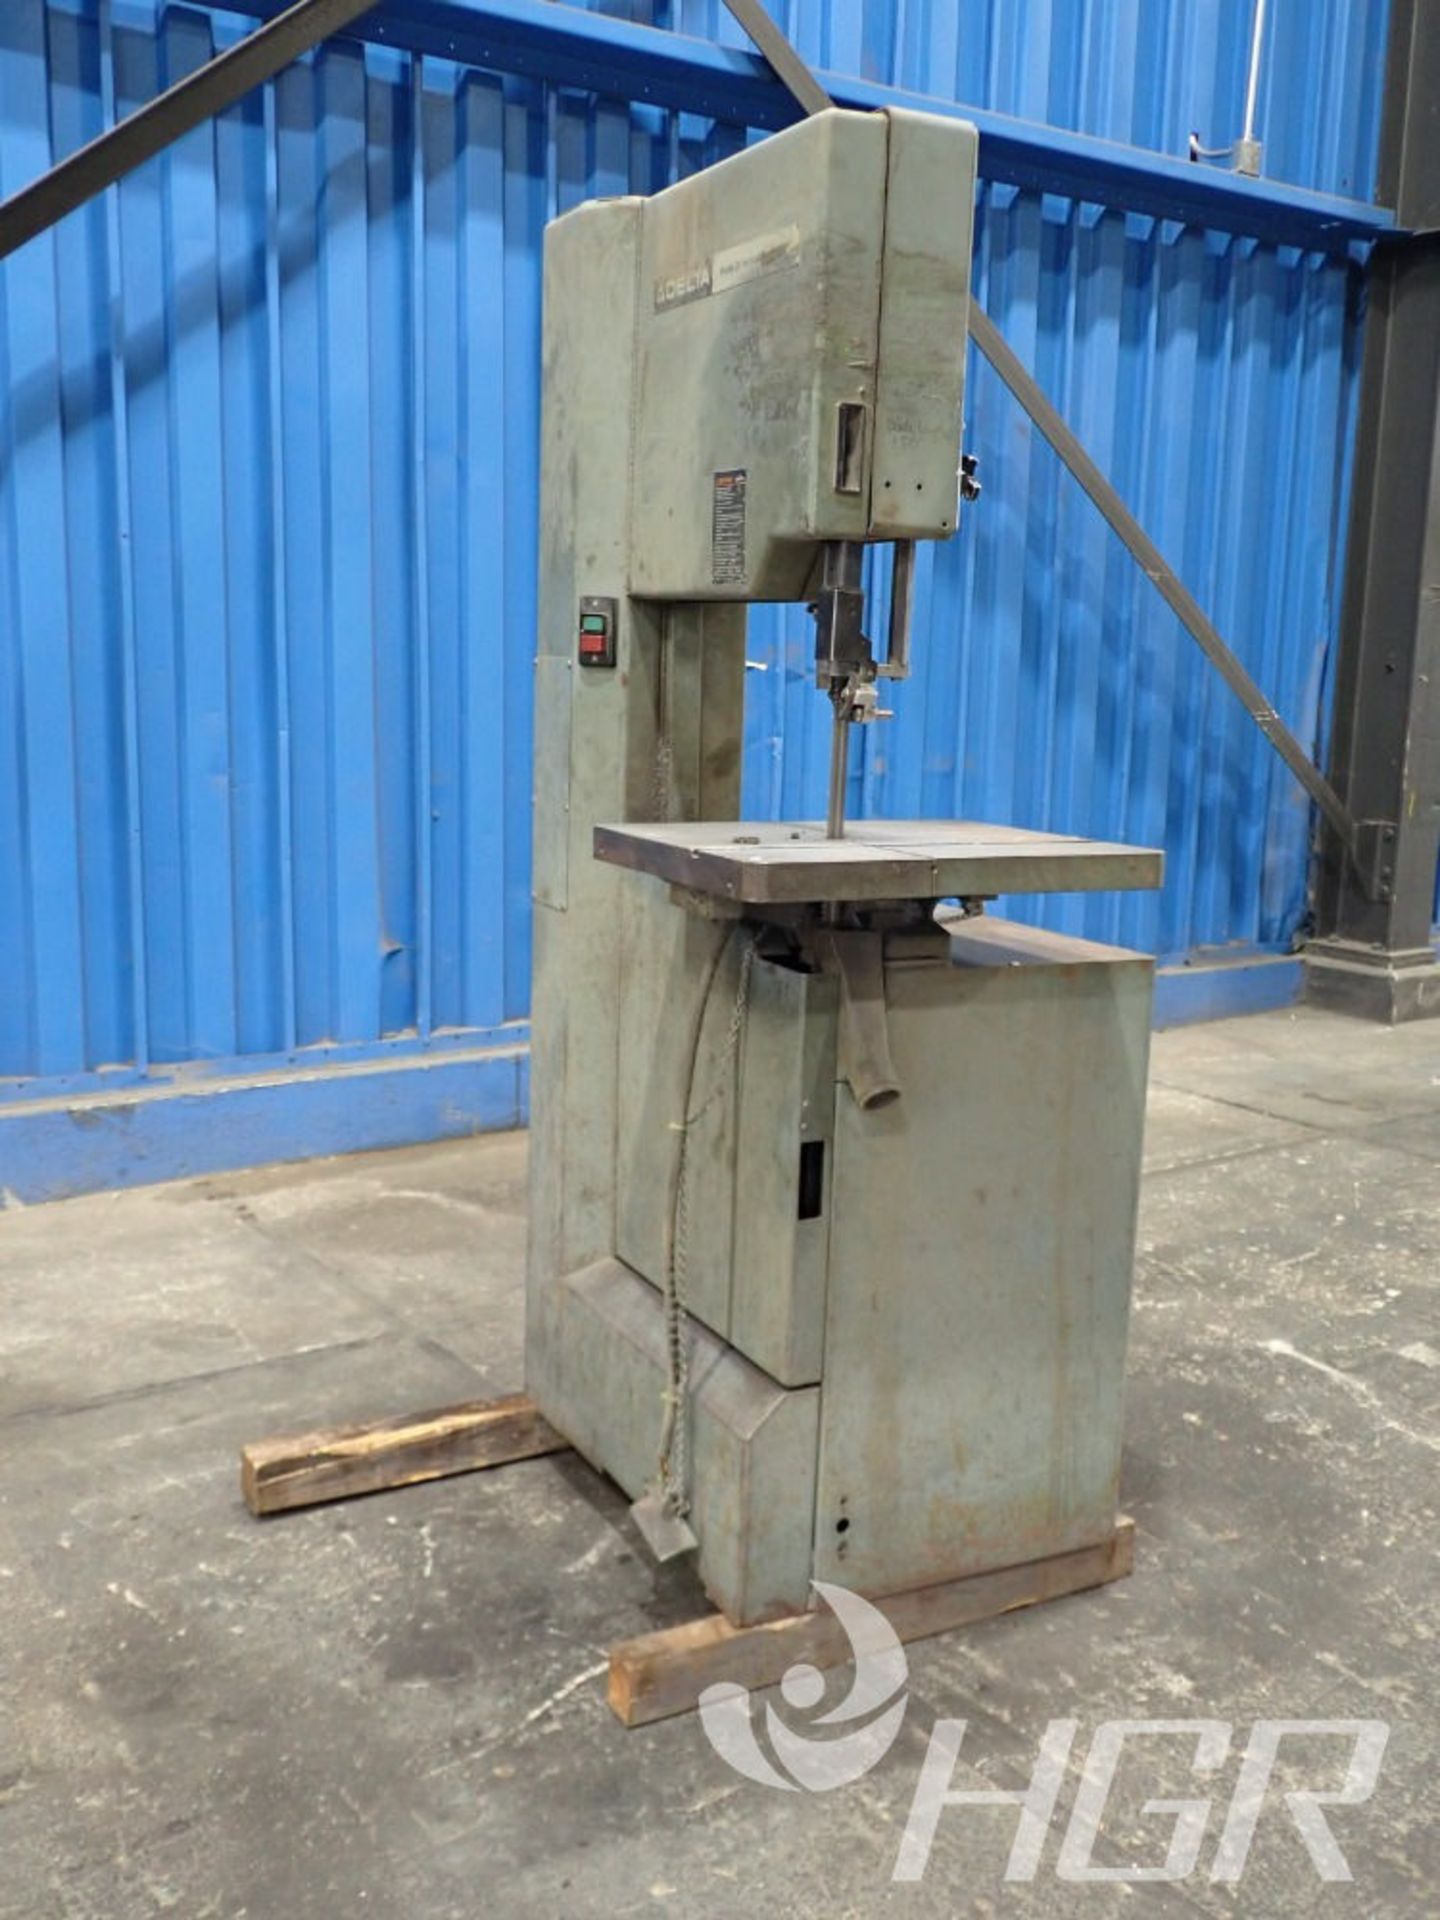 DELTA VERTICAL BAND SAW , Model 28-654, Date: n/a; s/n 88FA2262, Approx. Capacity: 20X8, Power: 3/